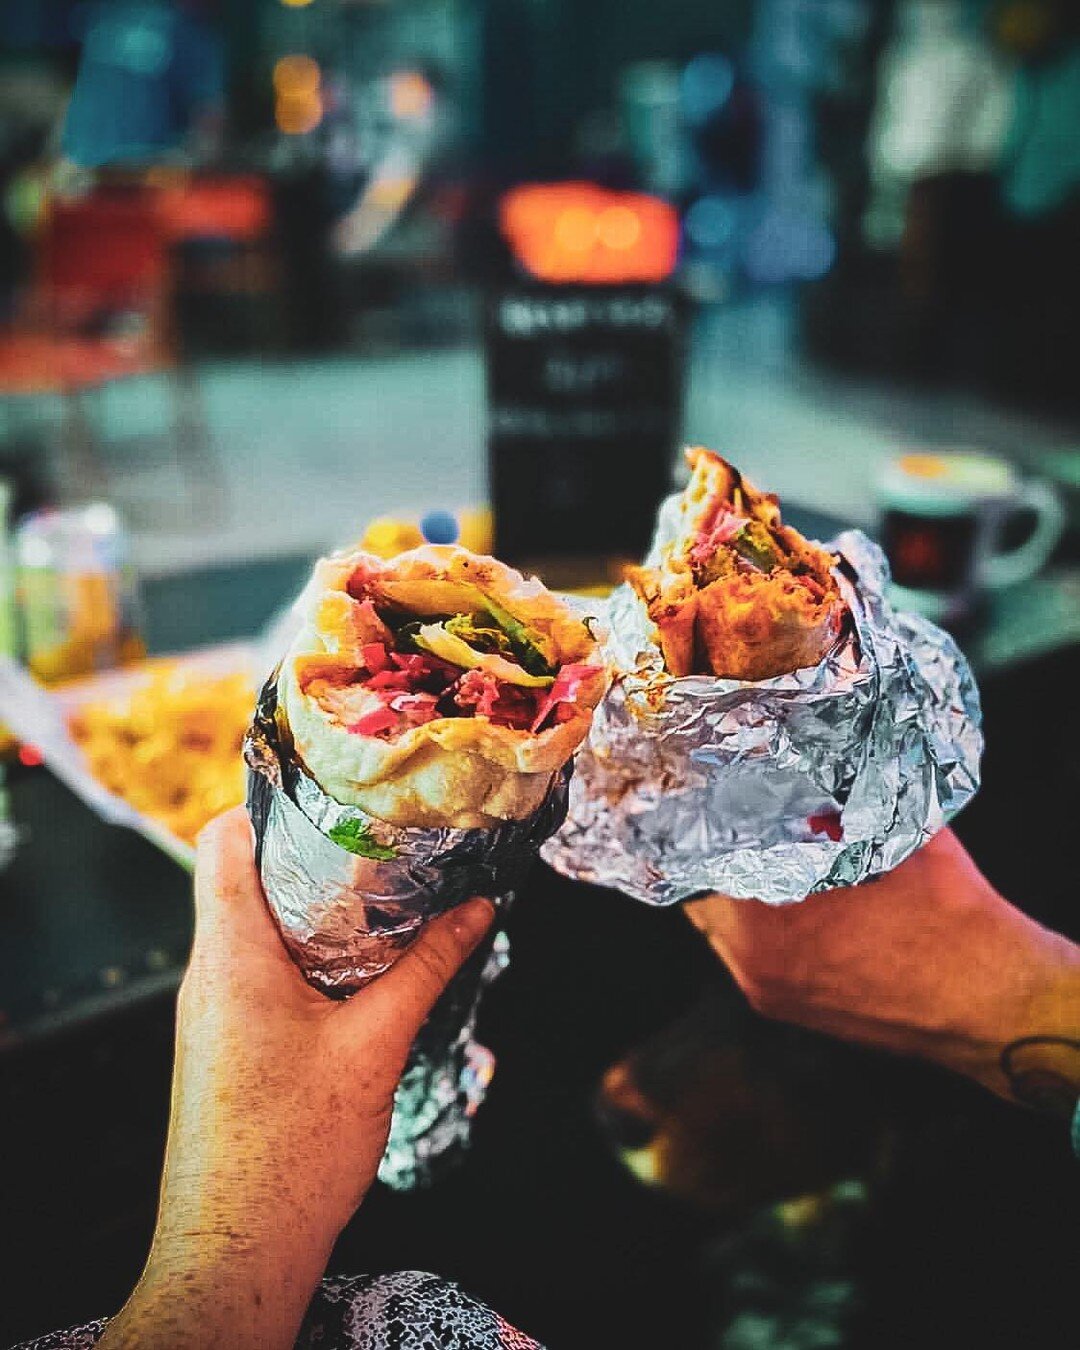 Wrapelicious 🌯
The @medhead123 Airstream provide three stunning wraps. Choose chicken shawarma, crispy halloumi or spiced chickpea falafel. The toughest choice you&rsquo;ll make today. They taste as good as they look!

#theloadingbay #theloadingbayn